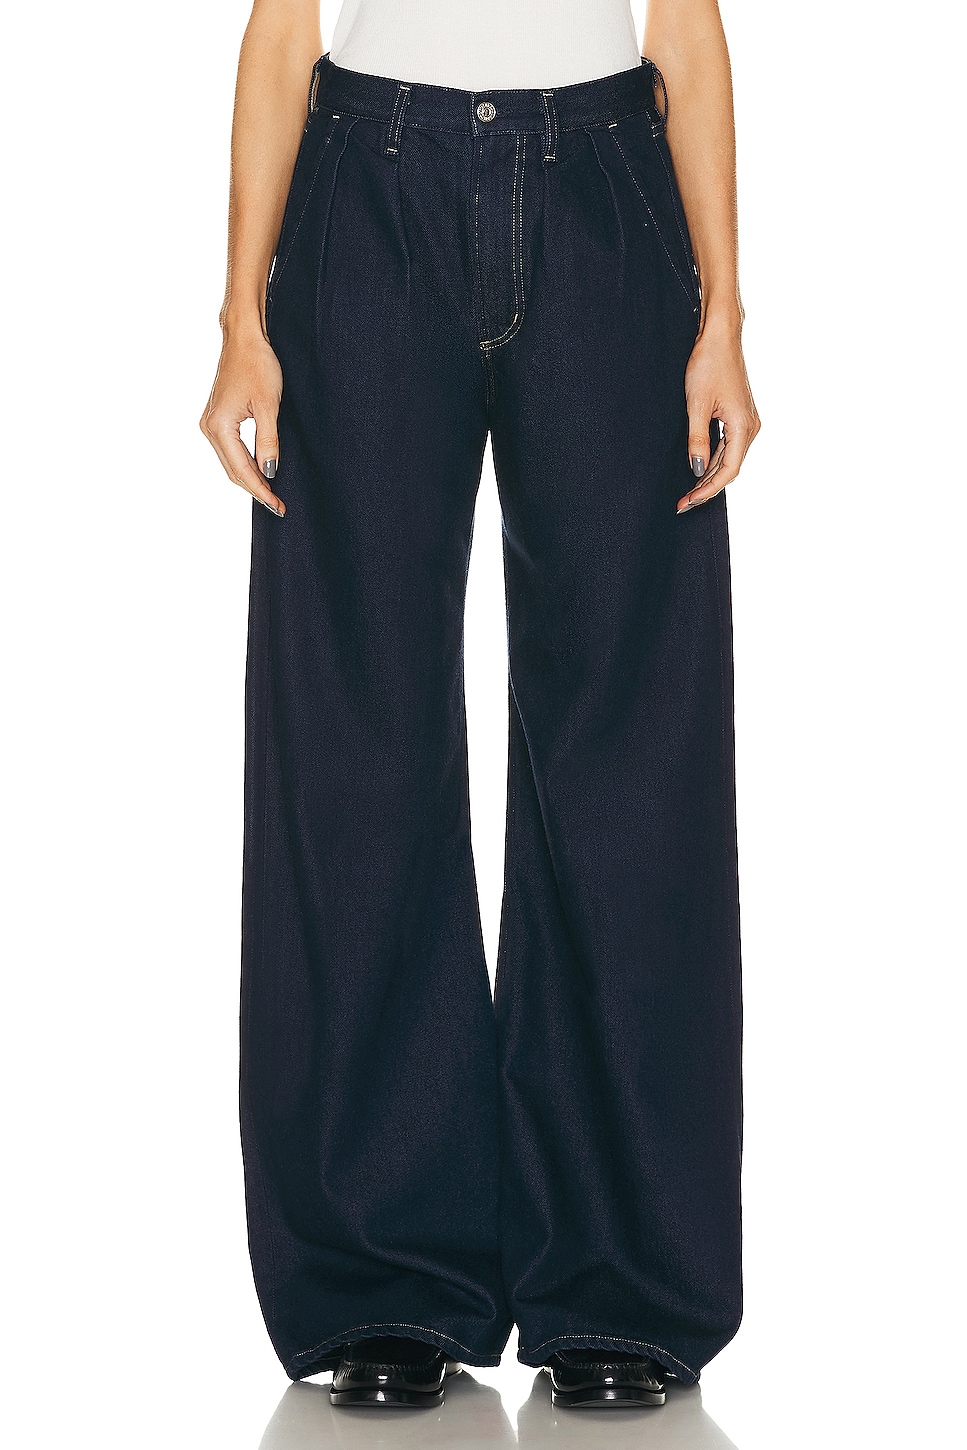 Image 1 of Citizens of Humanity Maritzy Pleated Trouser in Hudson